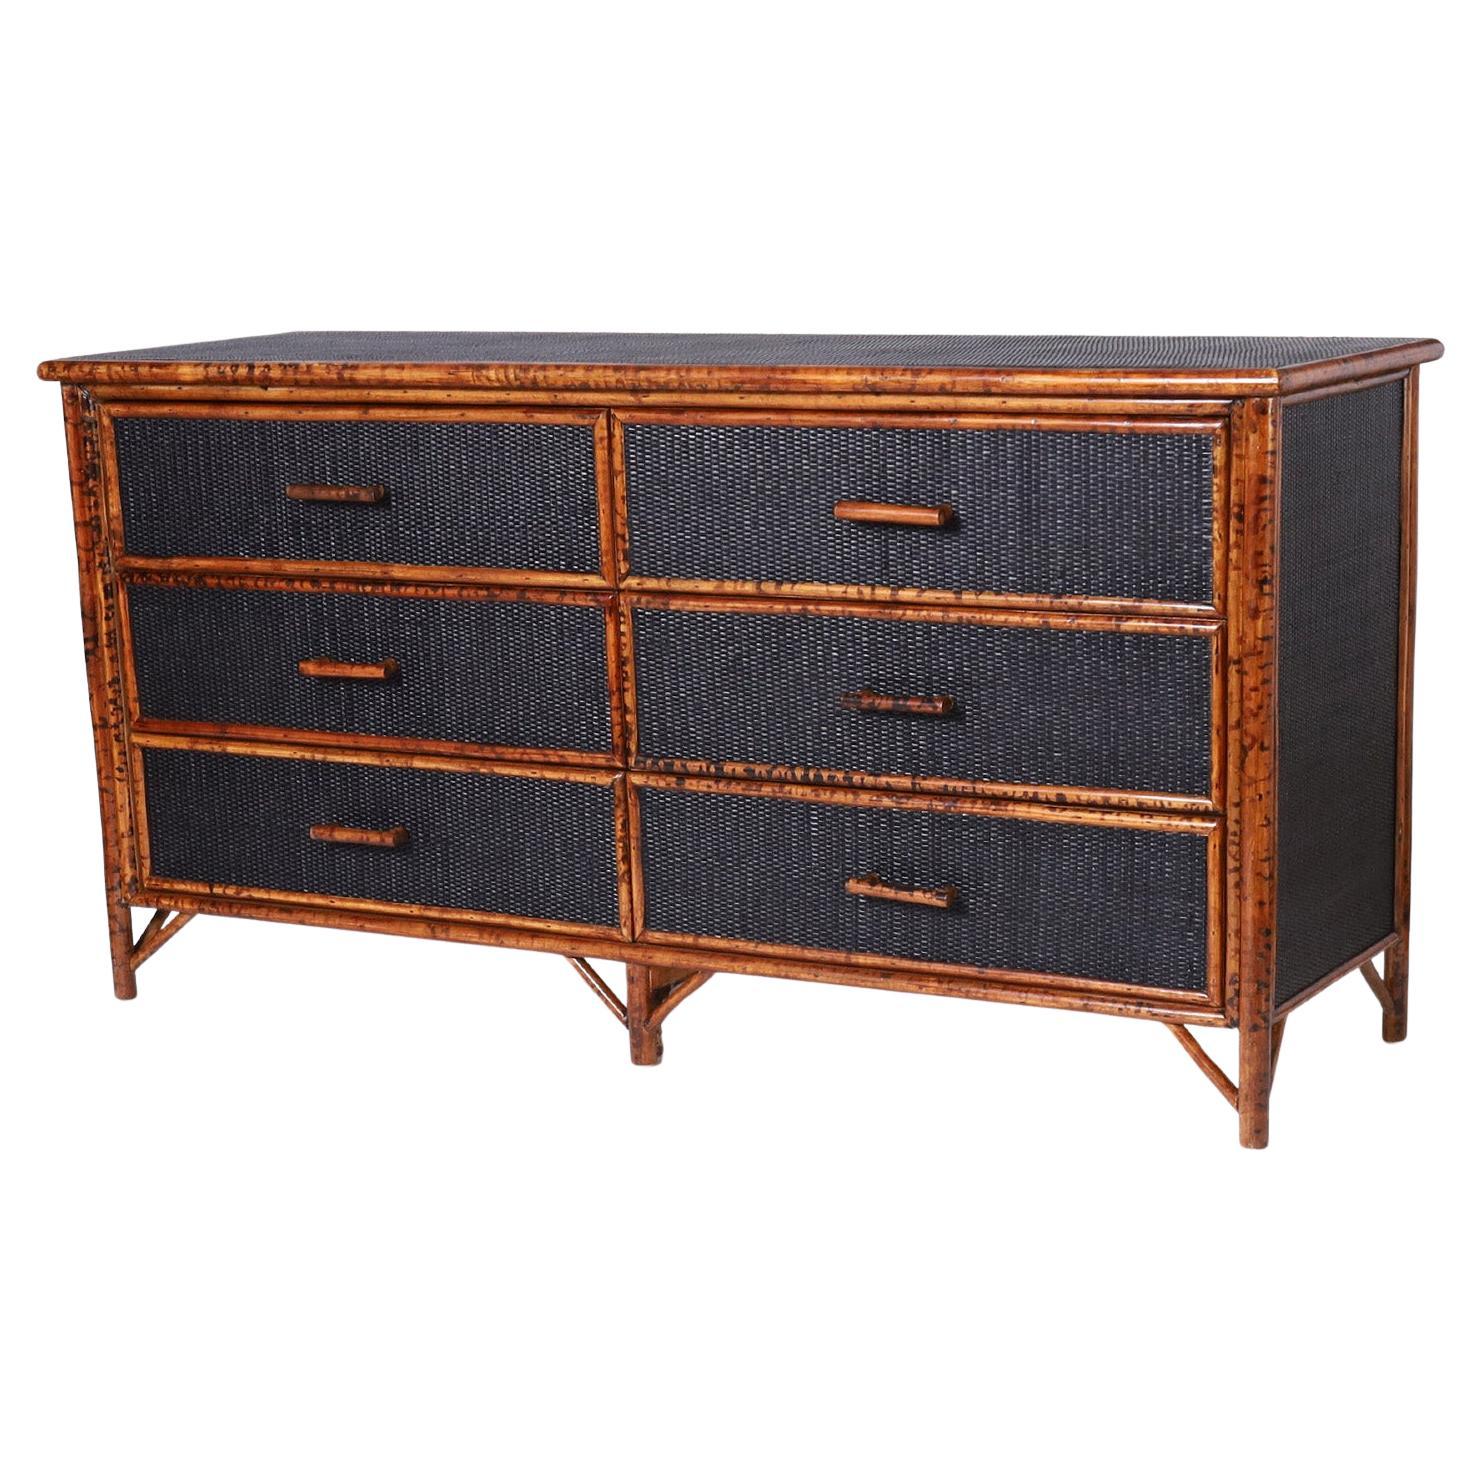 Vintage Faux Burnt Bamboo and Grasscloth Chest of Drawers or Dresser